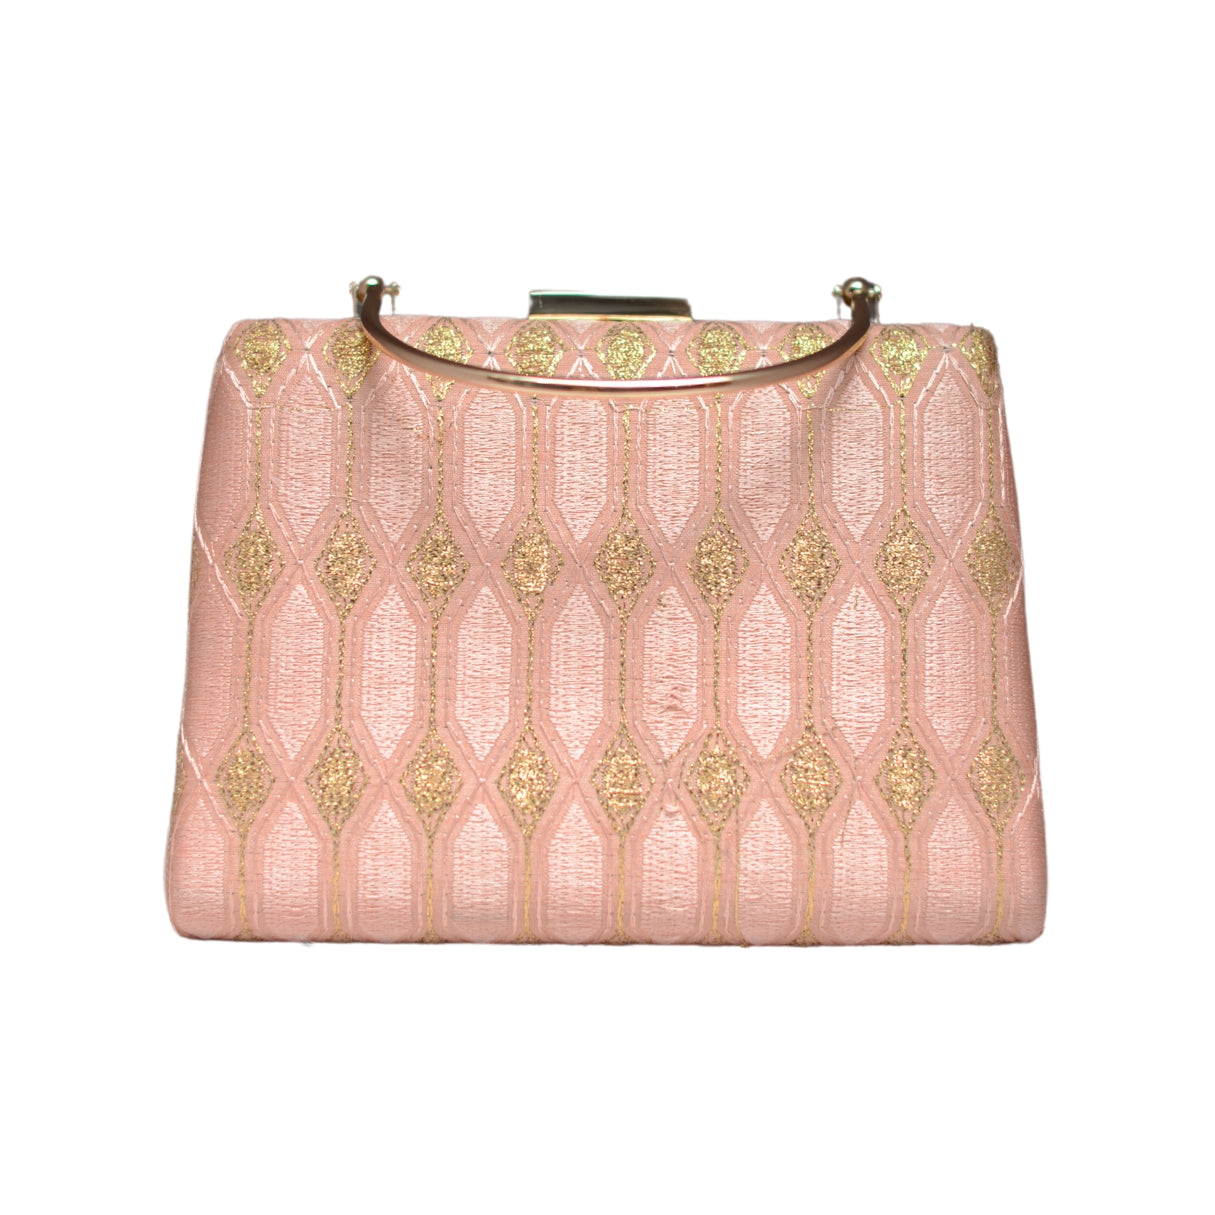 Peach And Golden Embroidery Clutch